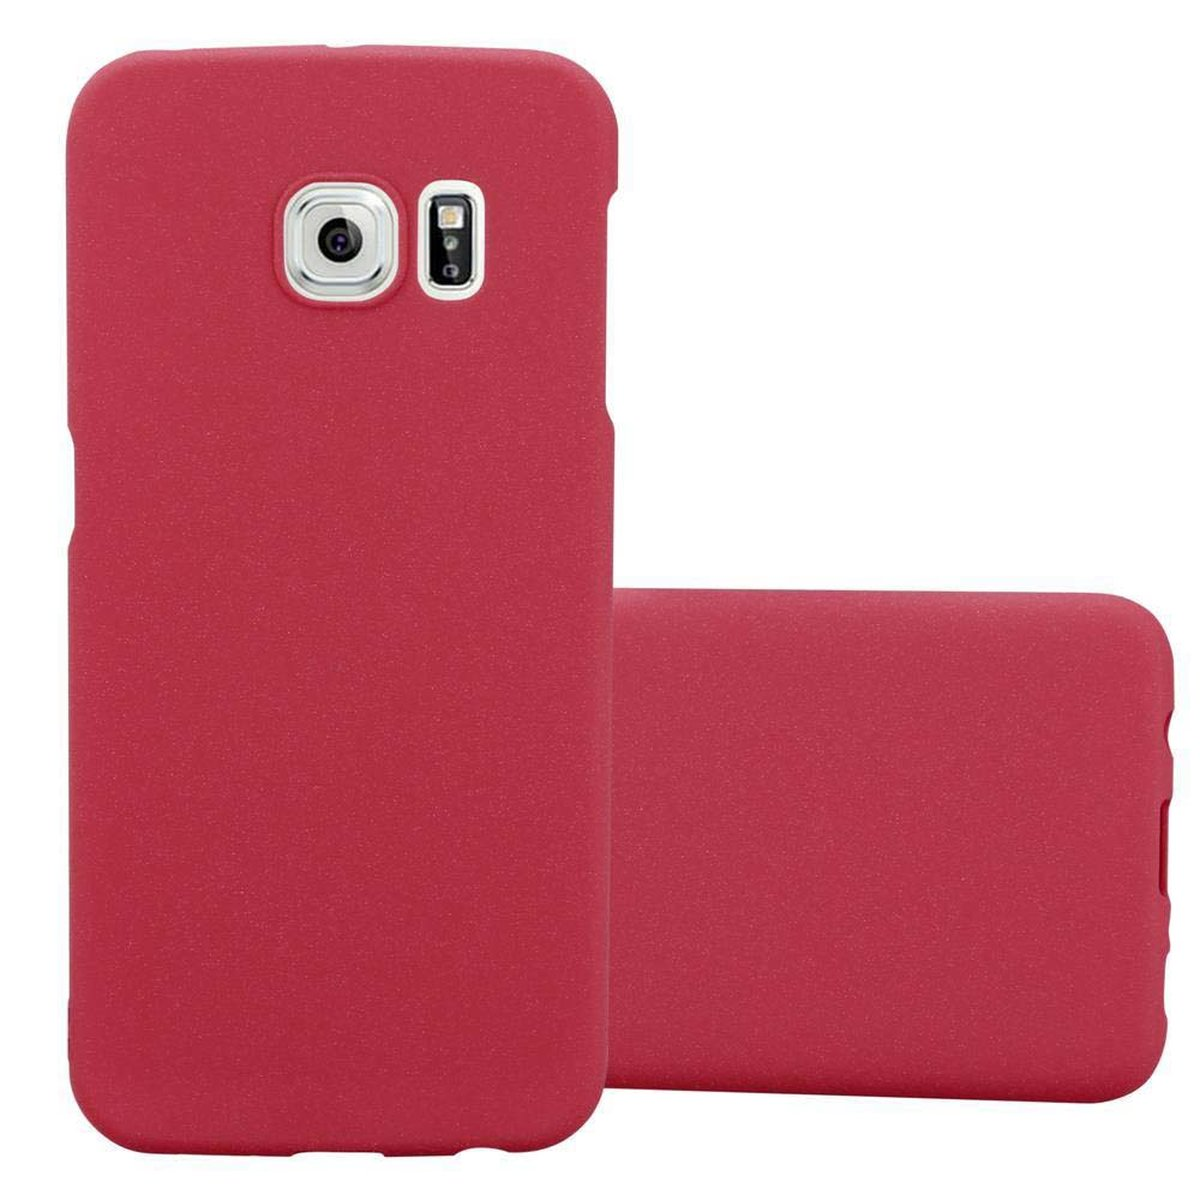 CADORABO Hülle im Hard Galaxy S6 Backcover, Case EDGE Style, FROSTY PLUS, ROT Samsung, Frosty